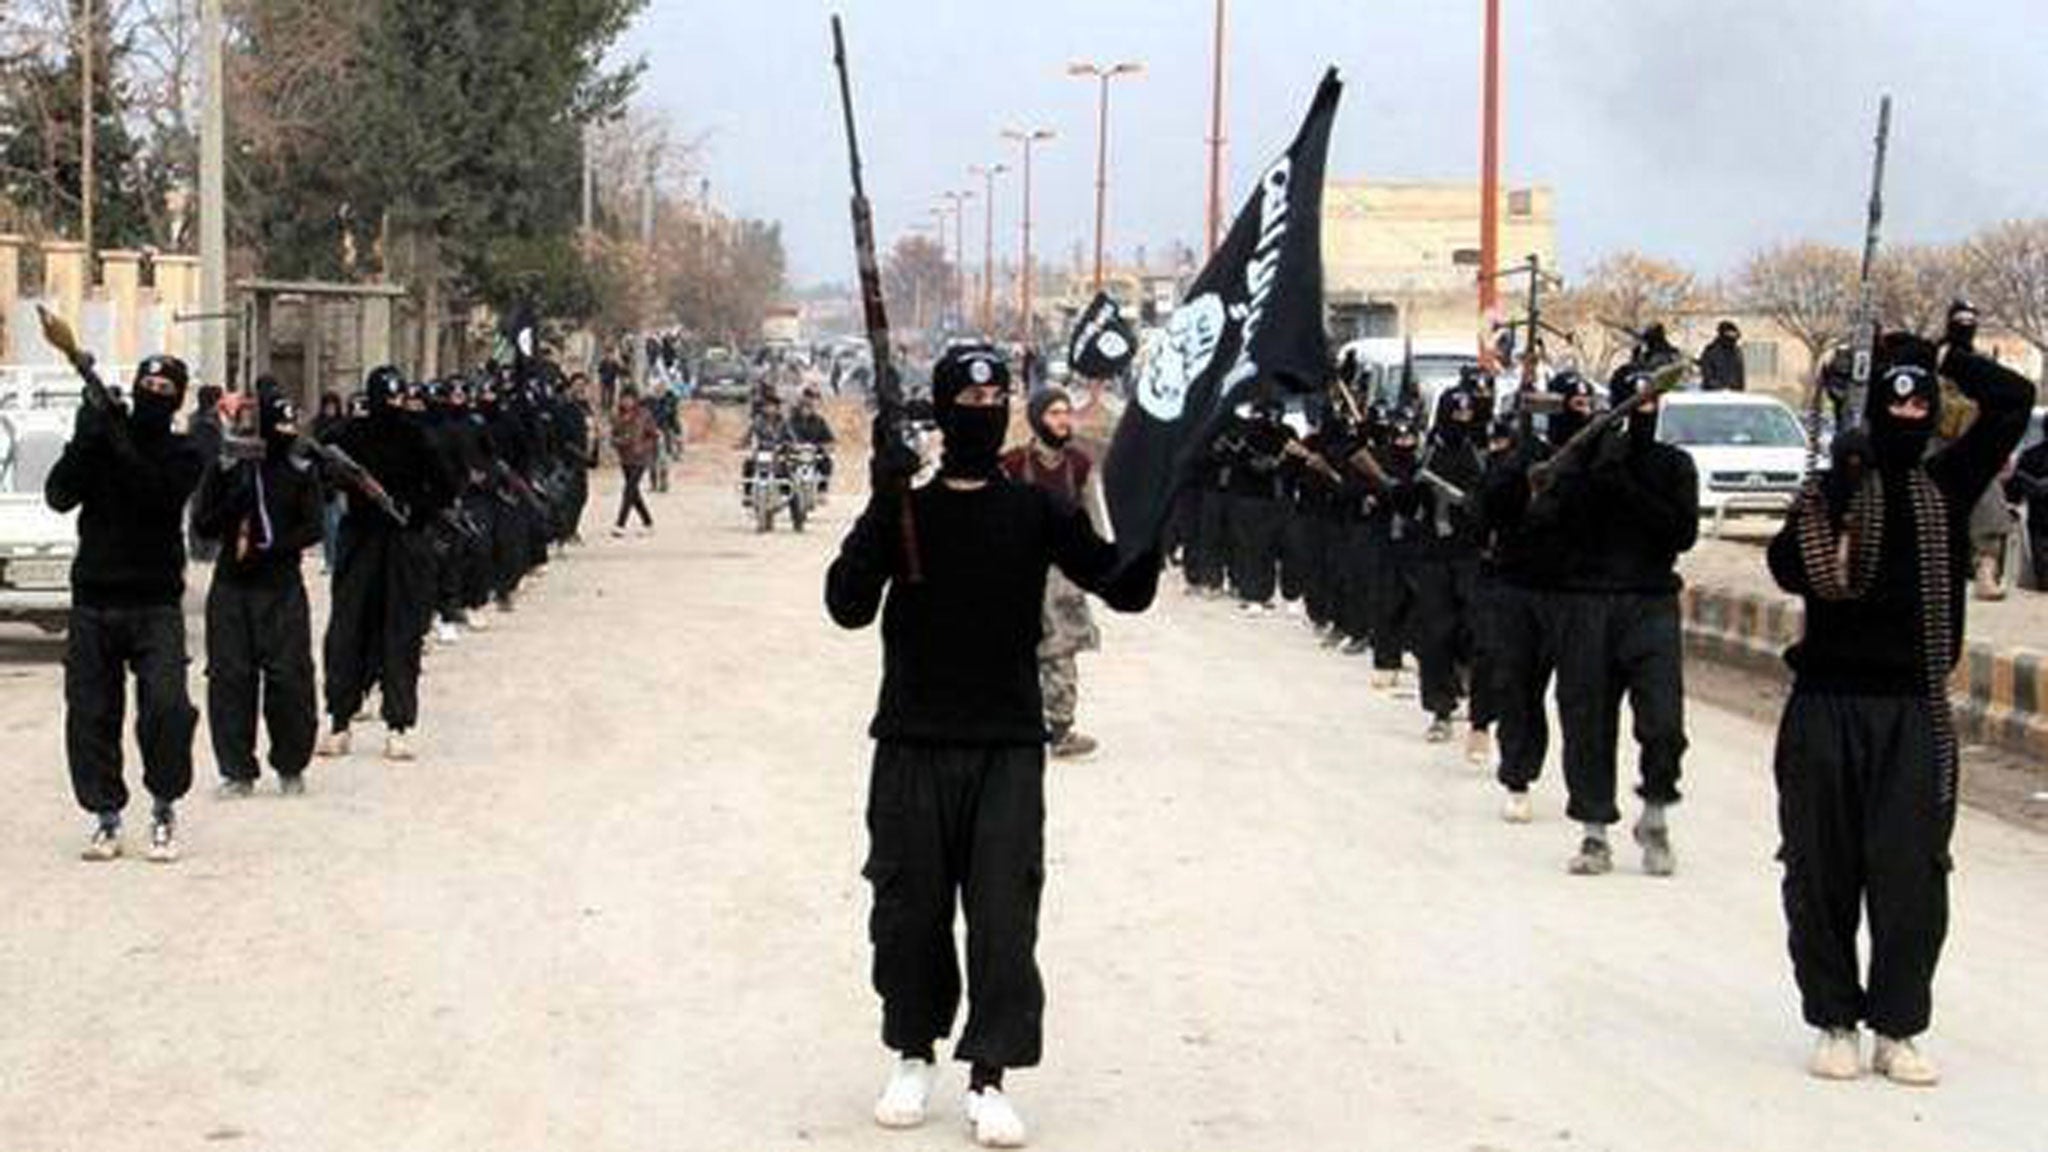 Jihadi media offensive: Islamic State fighters march in Syria